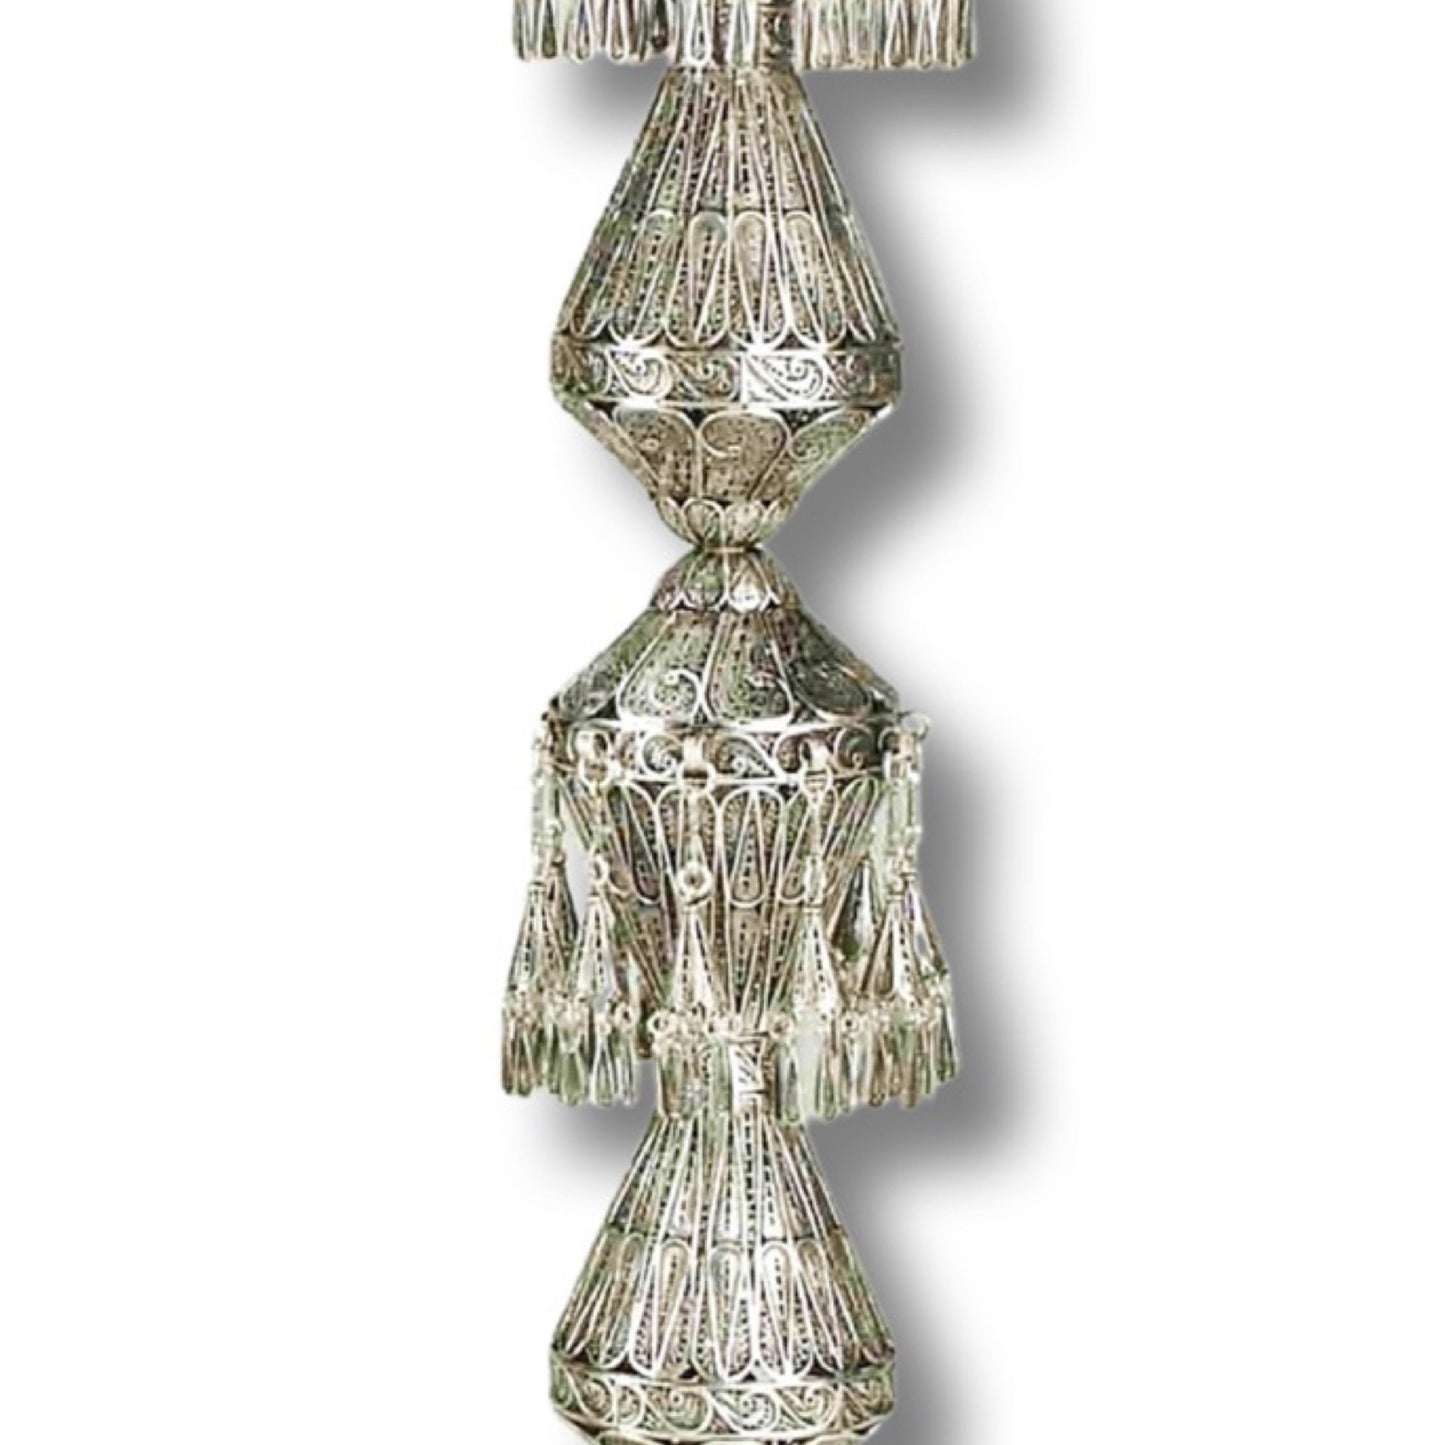 Big Sterling Silver Shabbat Candle Holders